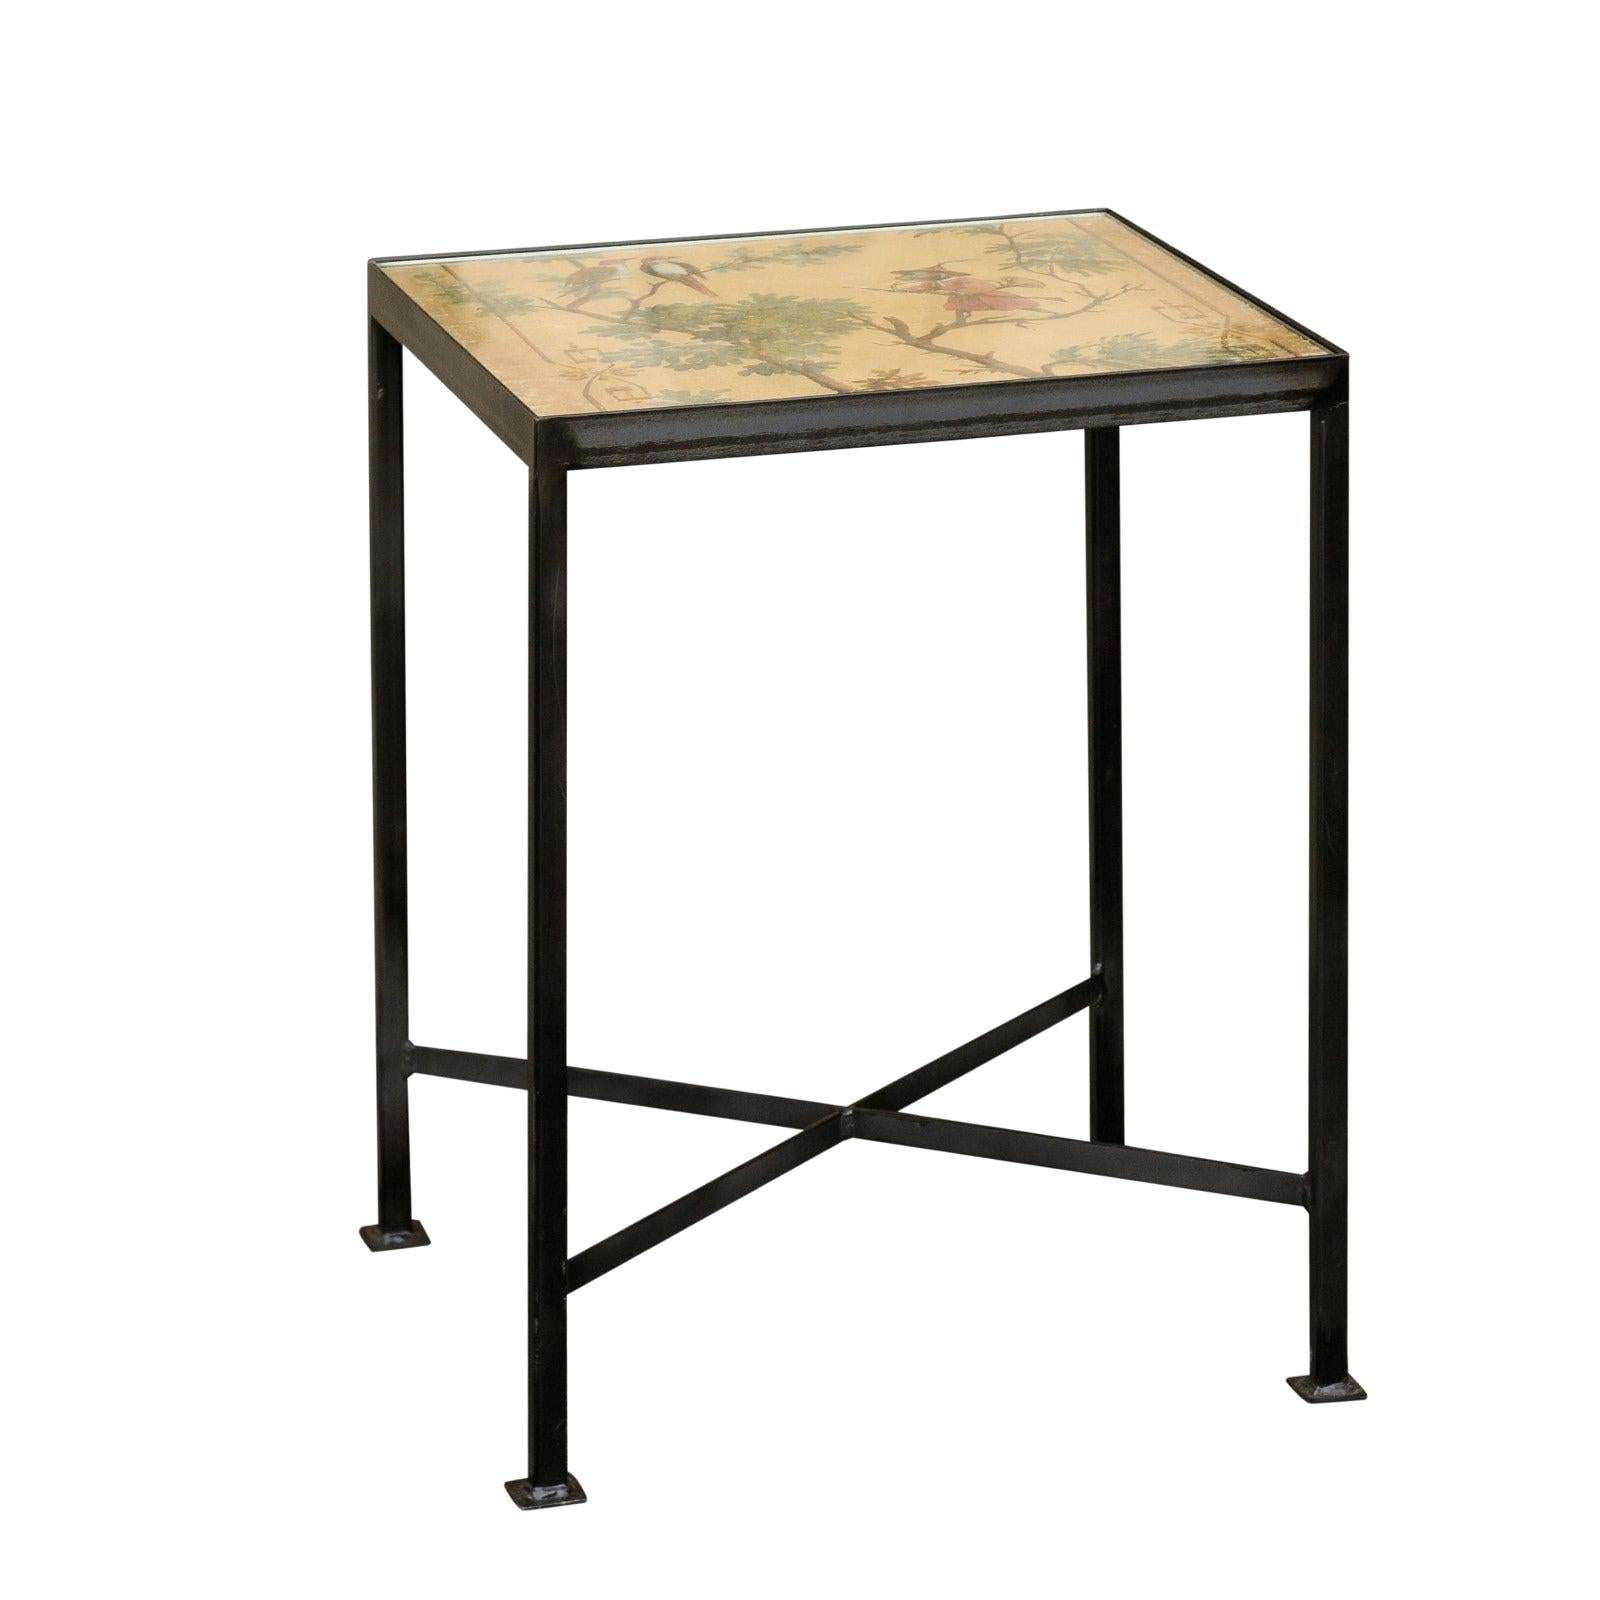 Contemporary Chinoiserie Side Table with Monkey and Birds Motifs on Iron Base